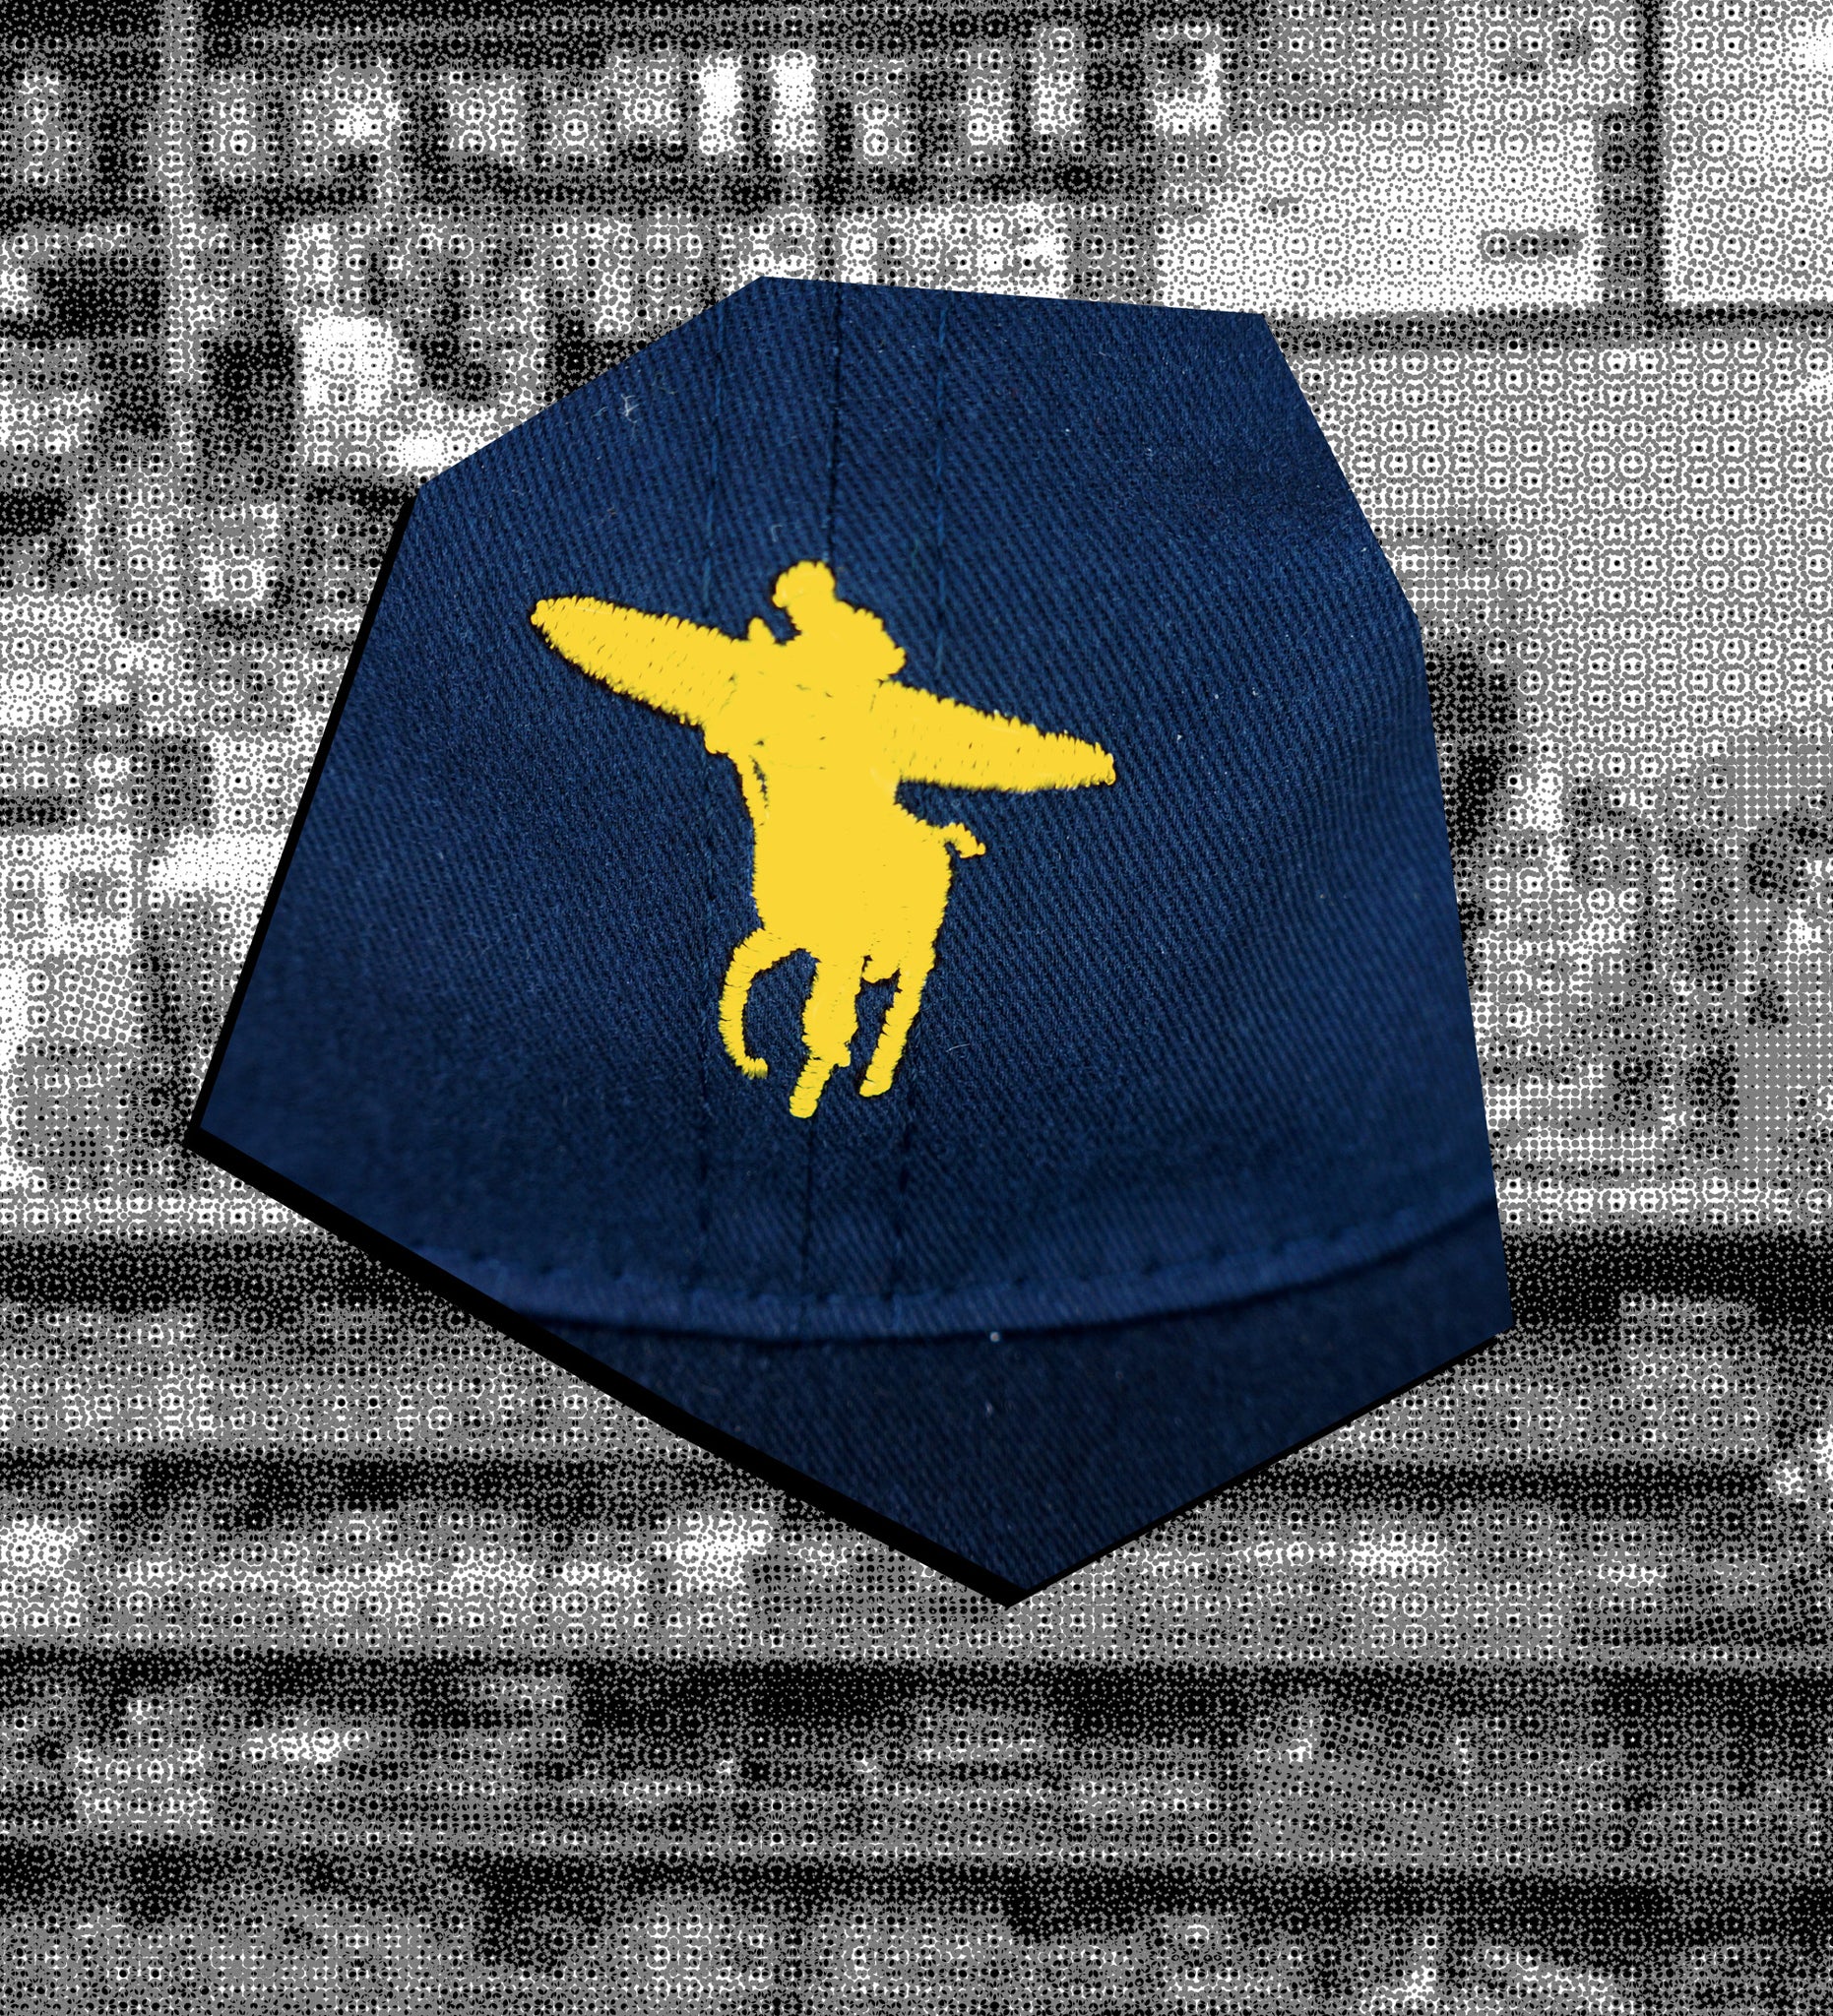 Ralph Don't Surf Hat (Navy-Yellow)